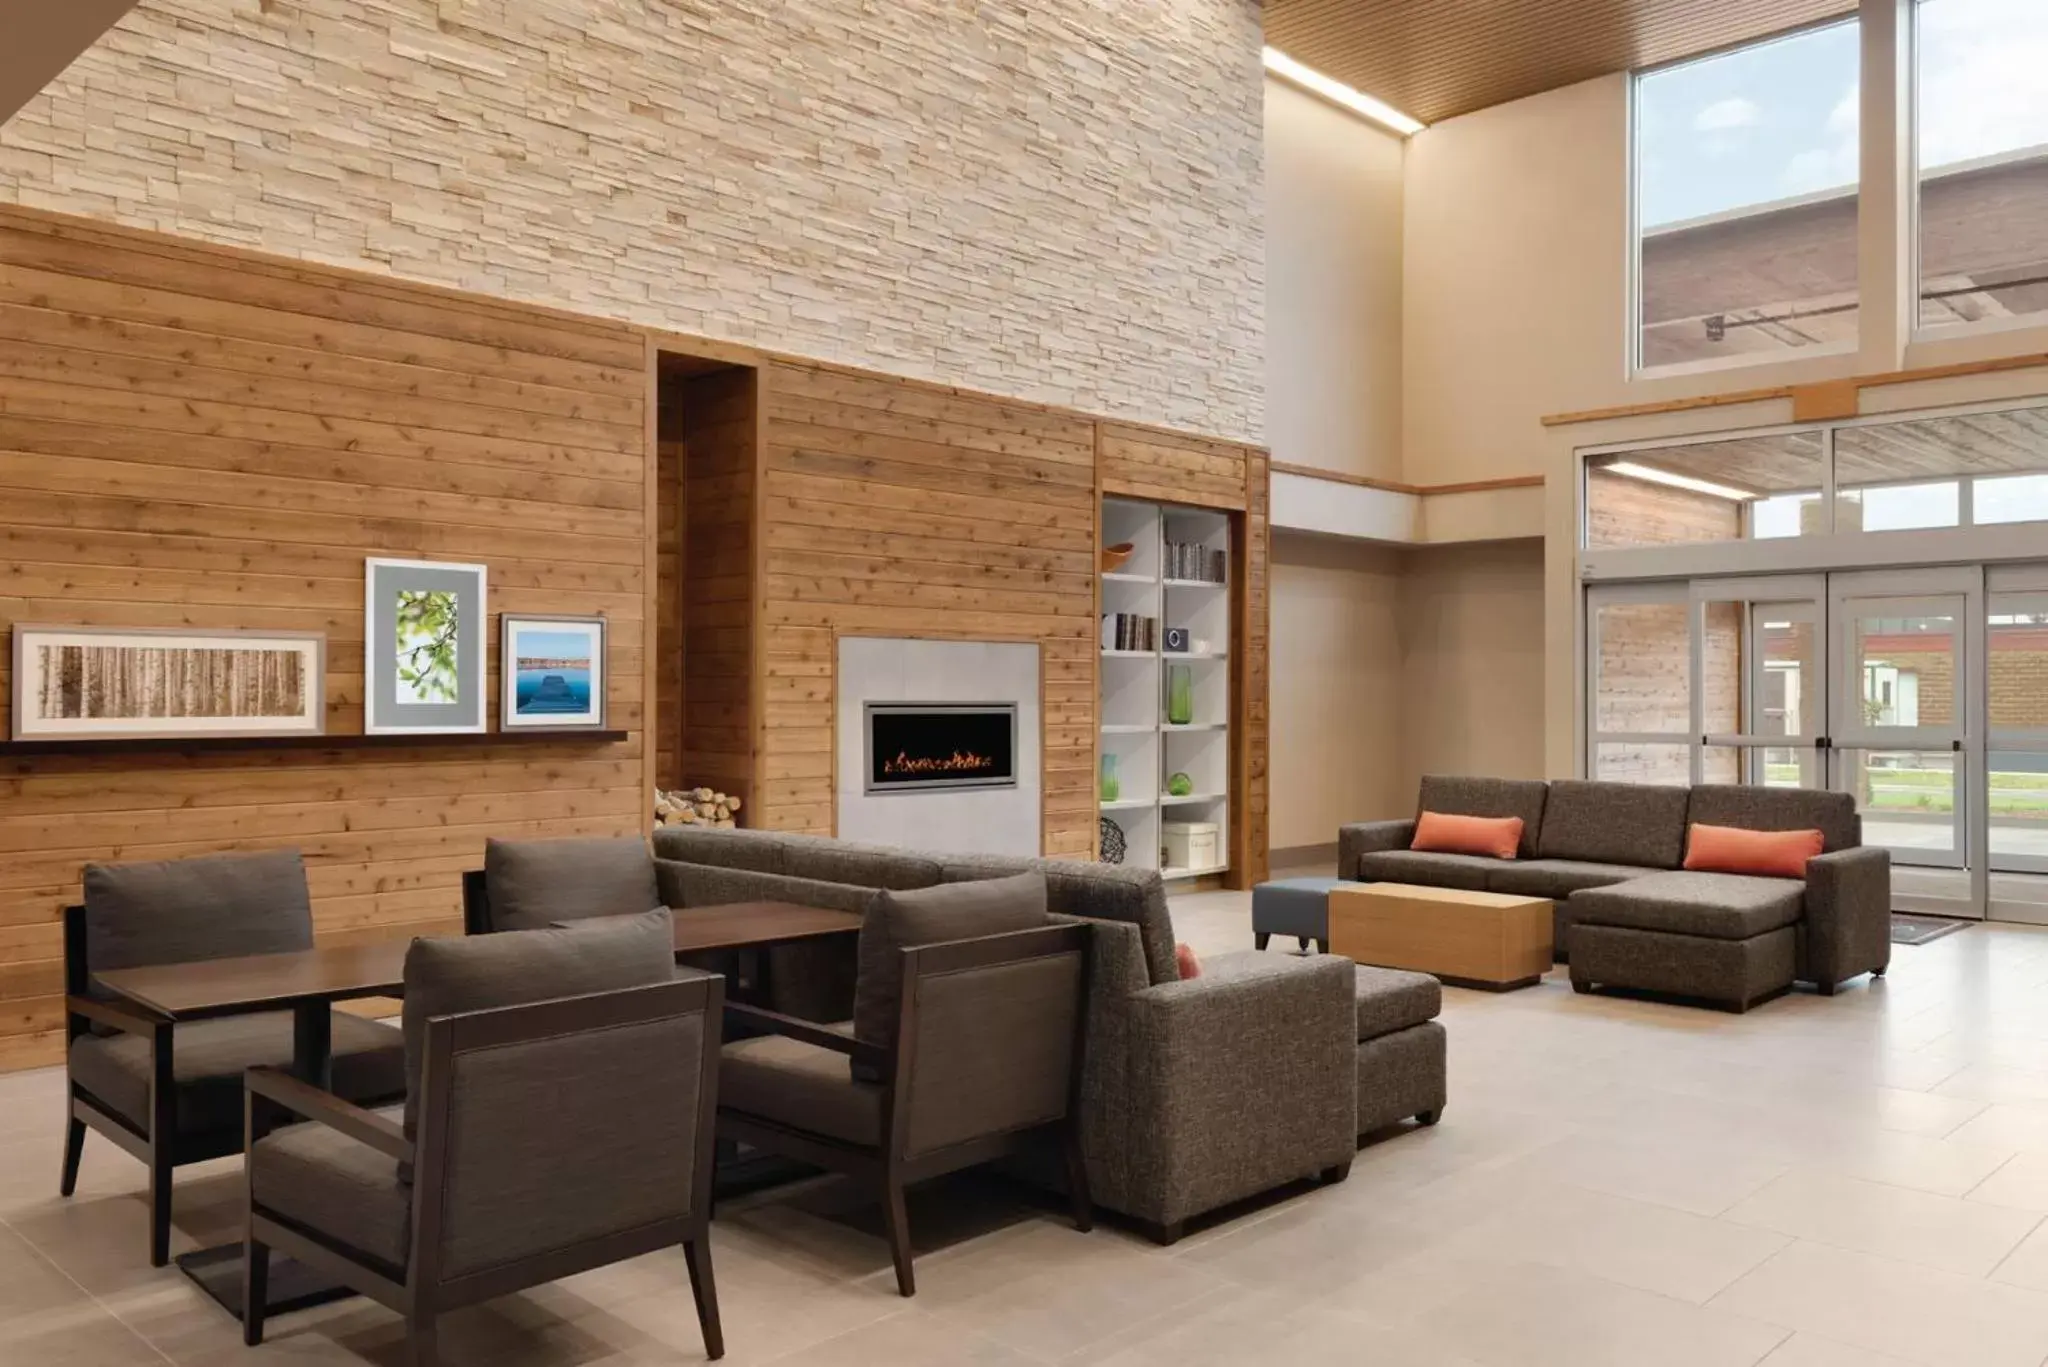 Lobby or reception in Country Inn & Suites by Radisson, Ft. Atkinson, WI